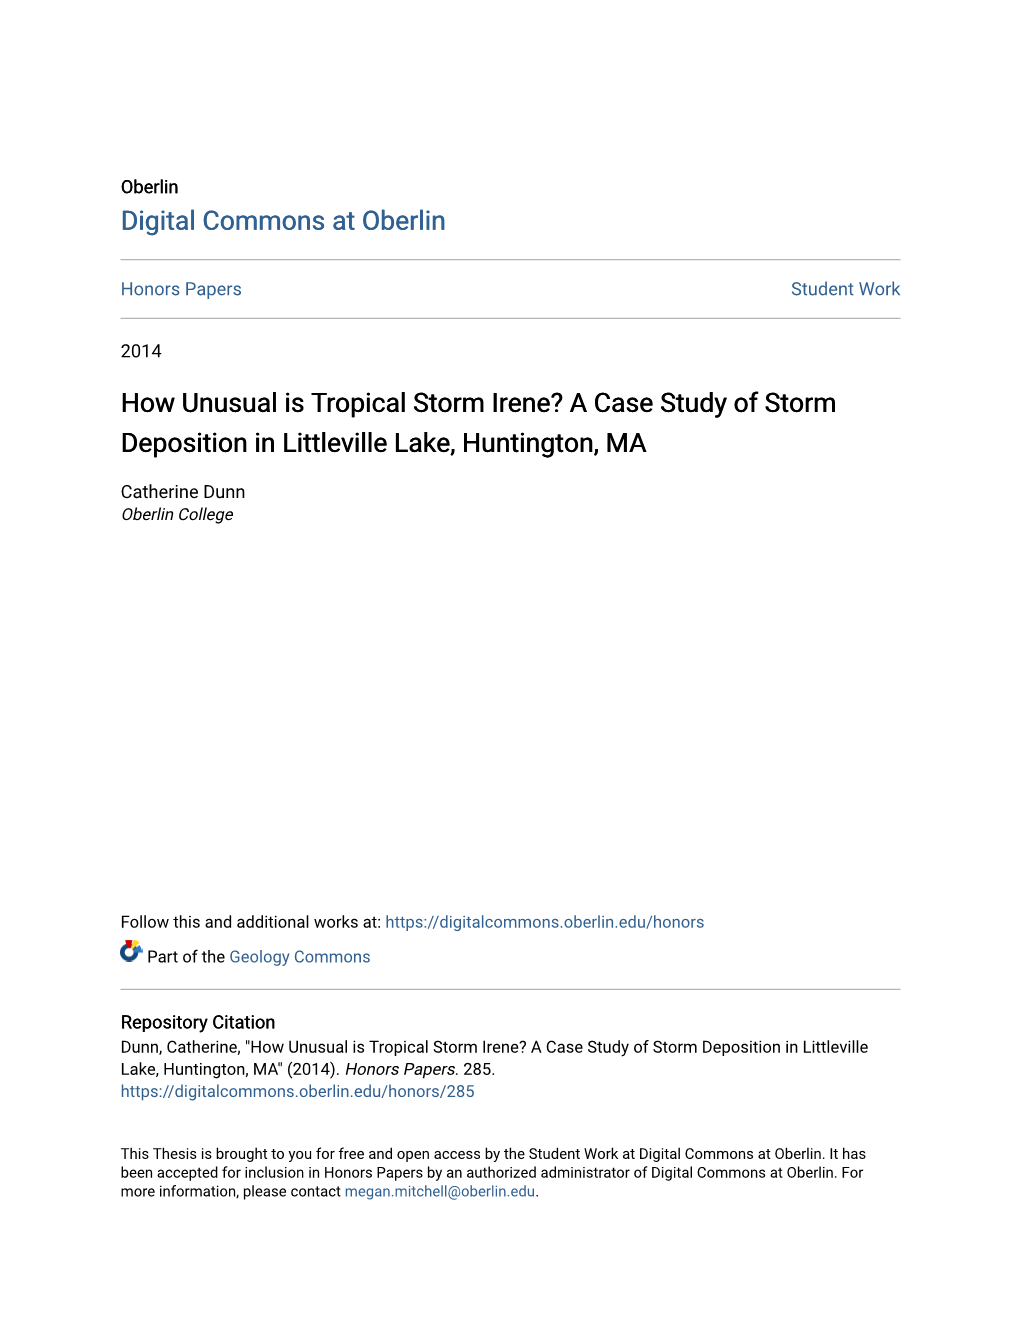 How Unusual Is Tropical Storm Irene? a Case Study of Storm Deposition in Littleville Lake, Huntington, MA